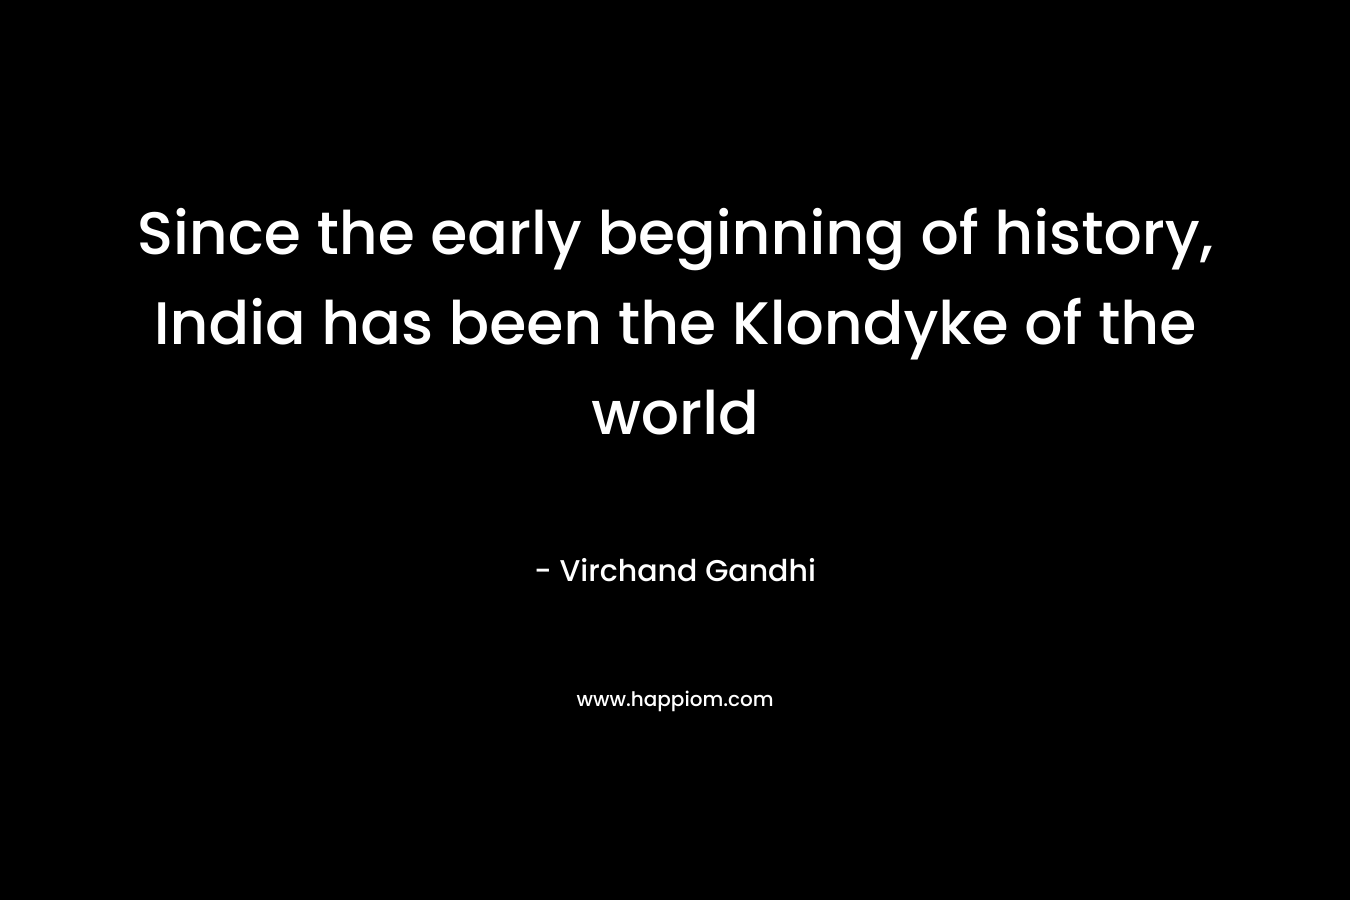 Since the early beginning of history, India has been the Klondyke of the world